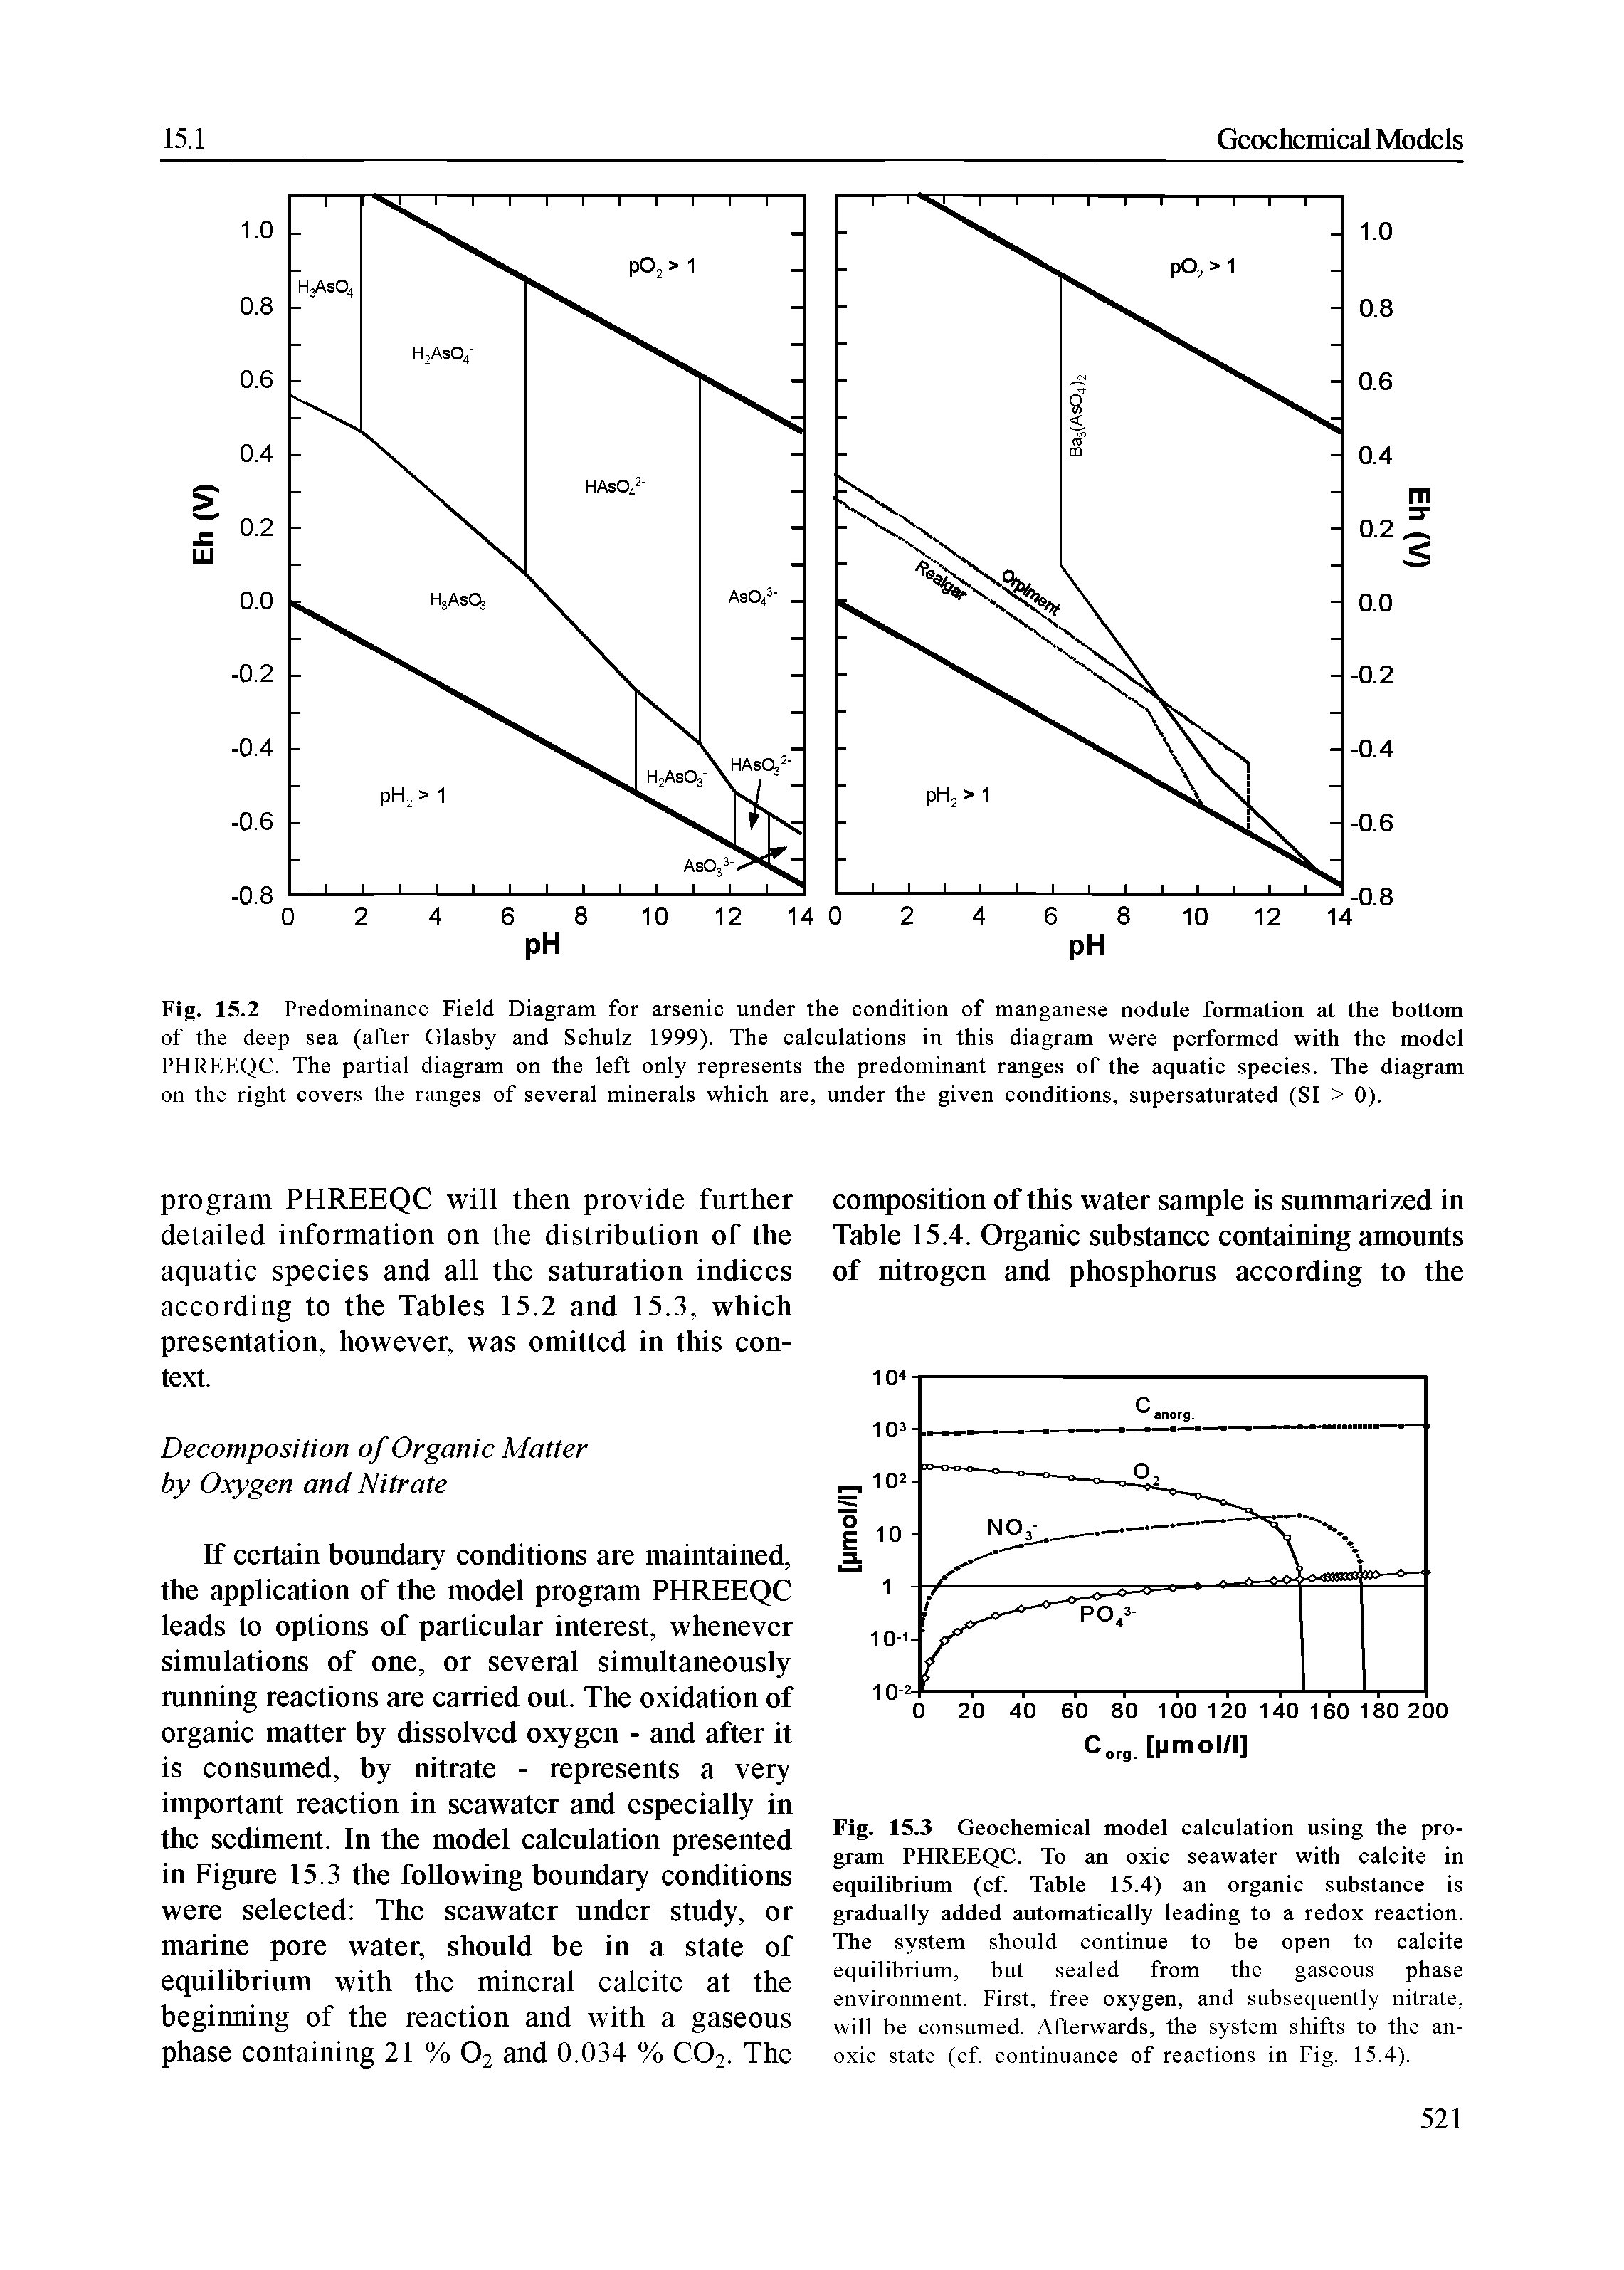 Fig. 15.3 Geochemical model calculation using the program PHREEQC. To an oxic seawater with calcite in equilibrium (cf. Table 15.4) an organic substance is gradually added automatically leading to a redox reaction. The system should continue to be open to calcite equilibrium, but sealed from the gaseous phase...